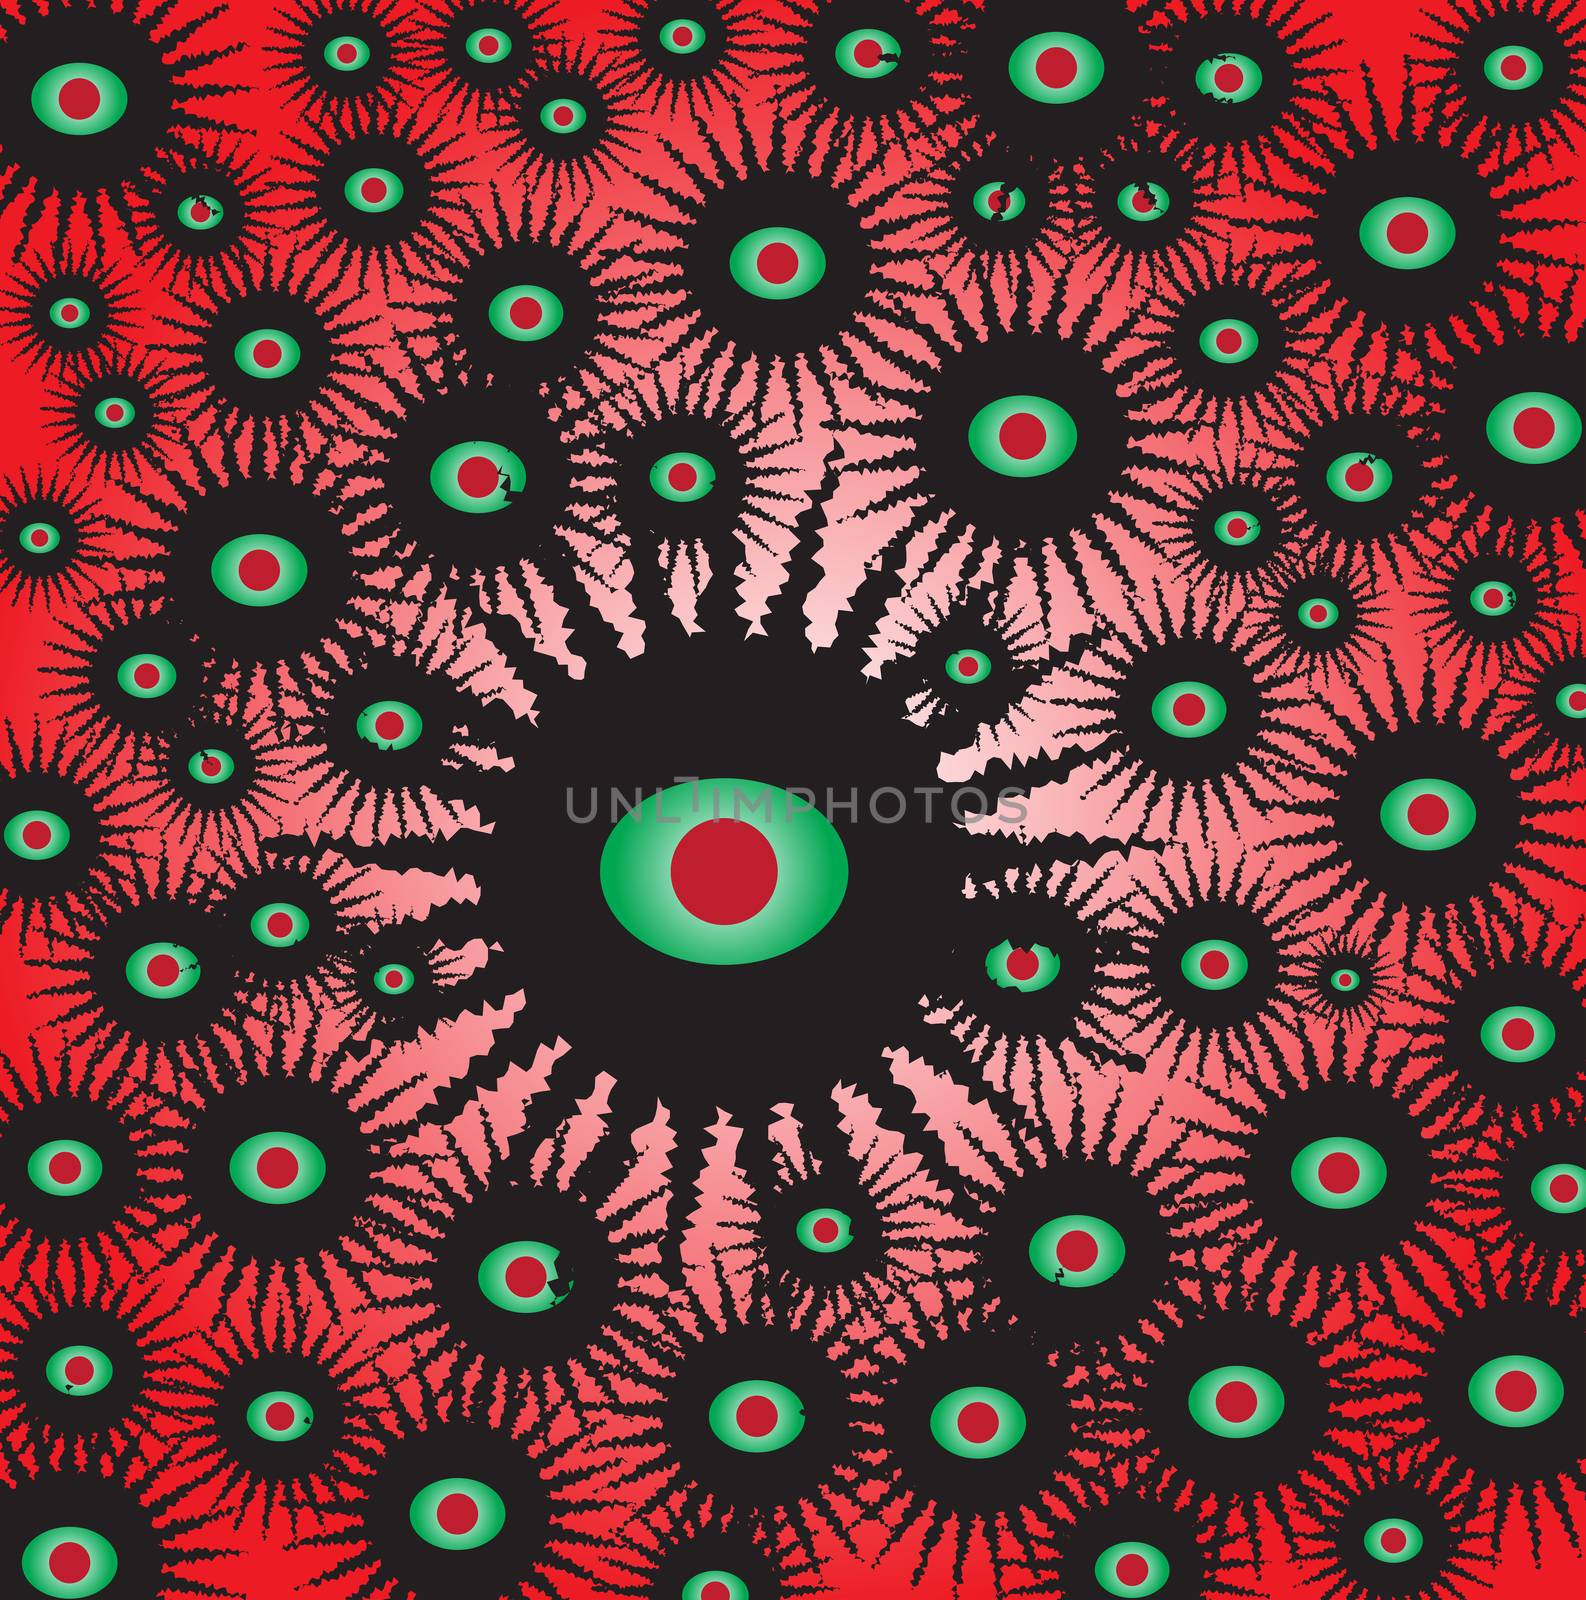 The viral swarm of Covid 19 with large eyes isolated over a red background